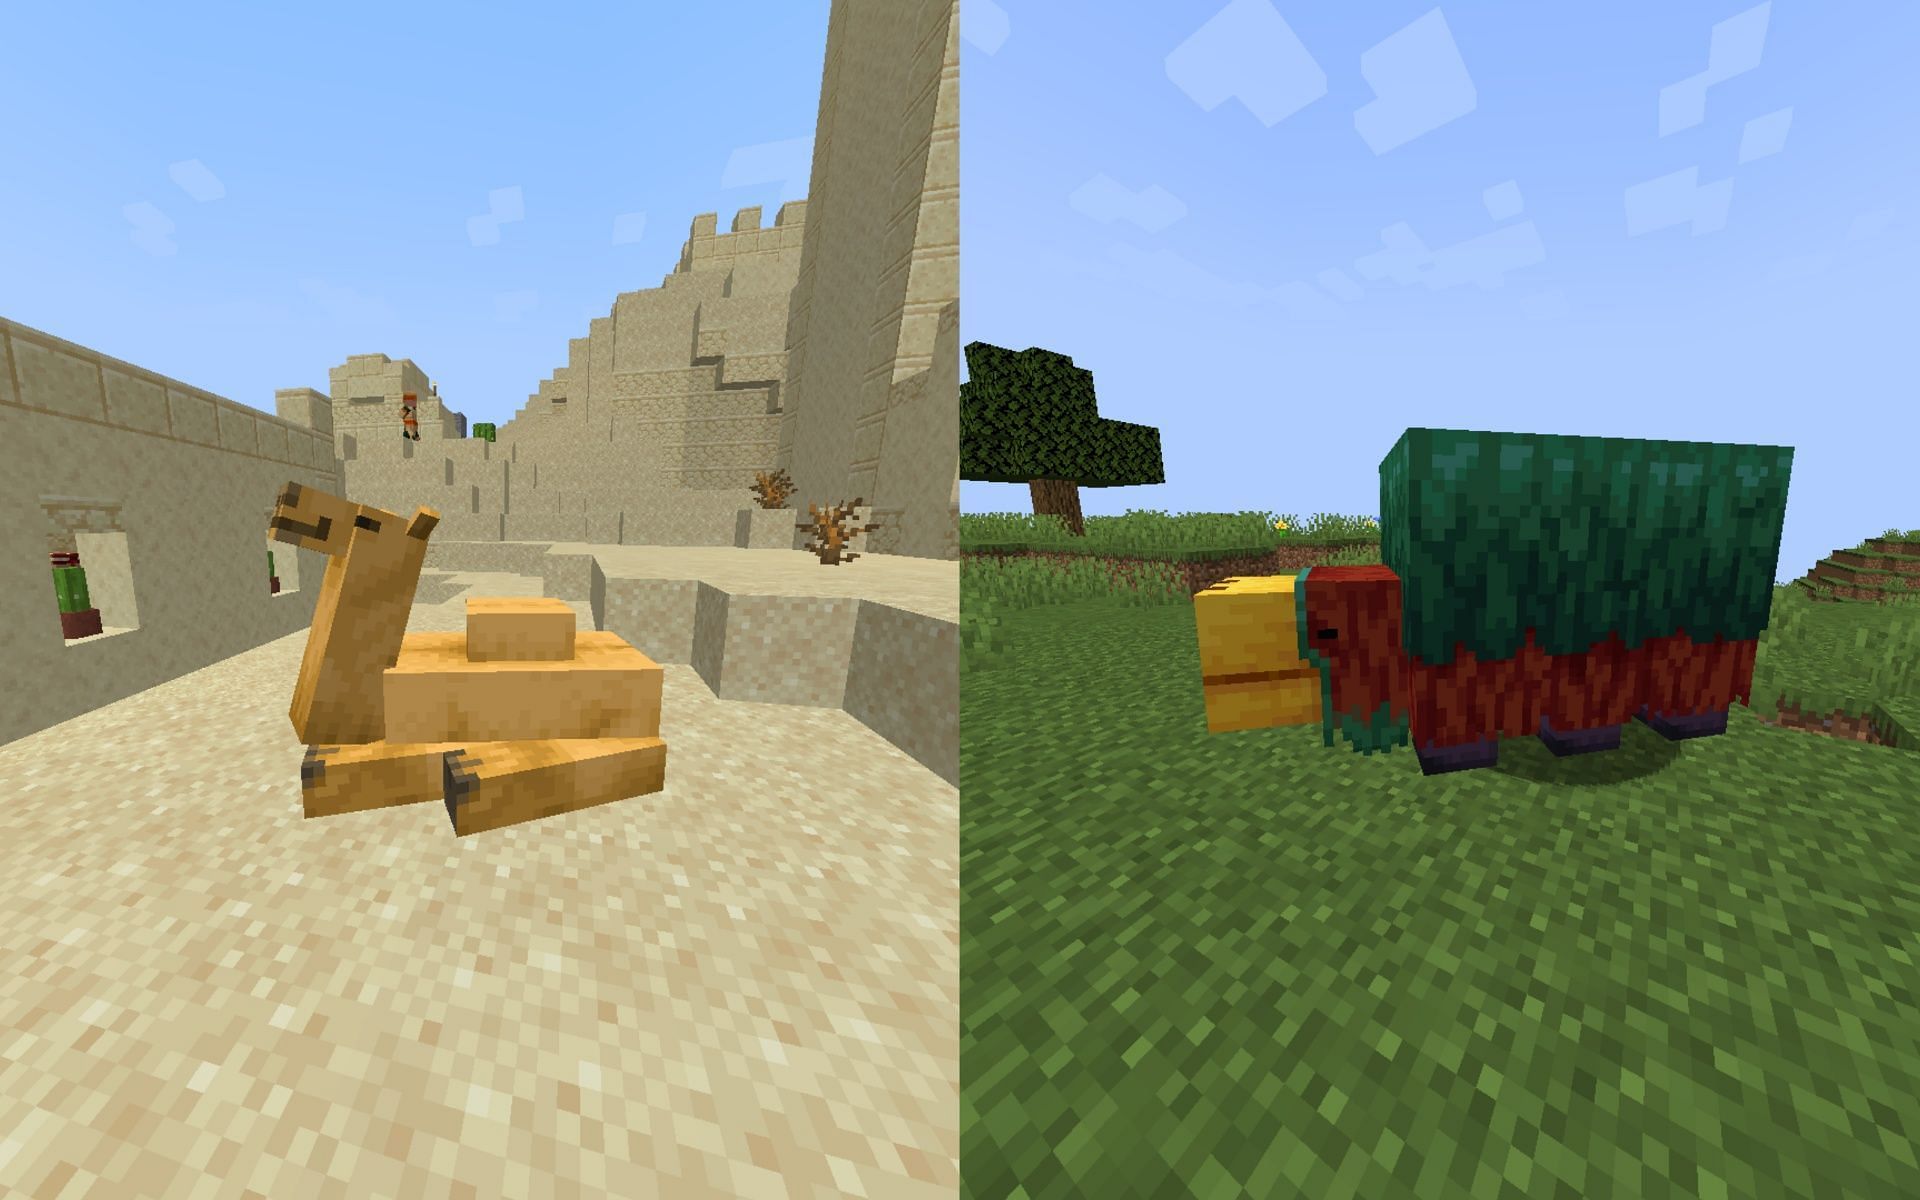 The Camel and Sniffer in Minecraft 1.20 (Image via Mojang)